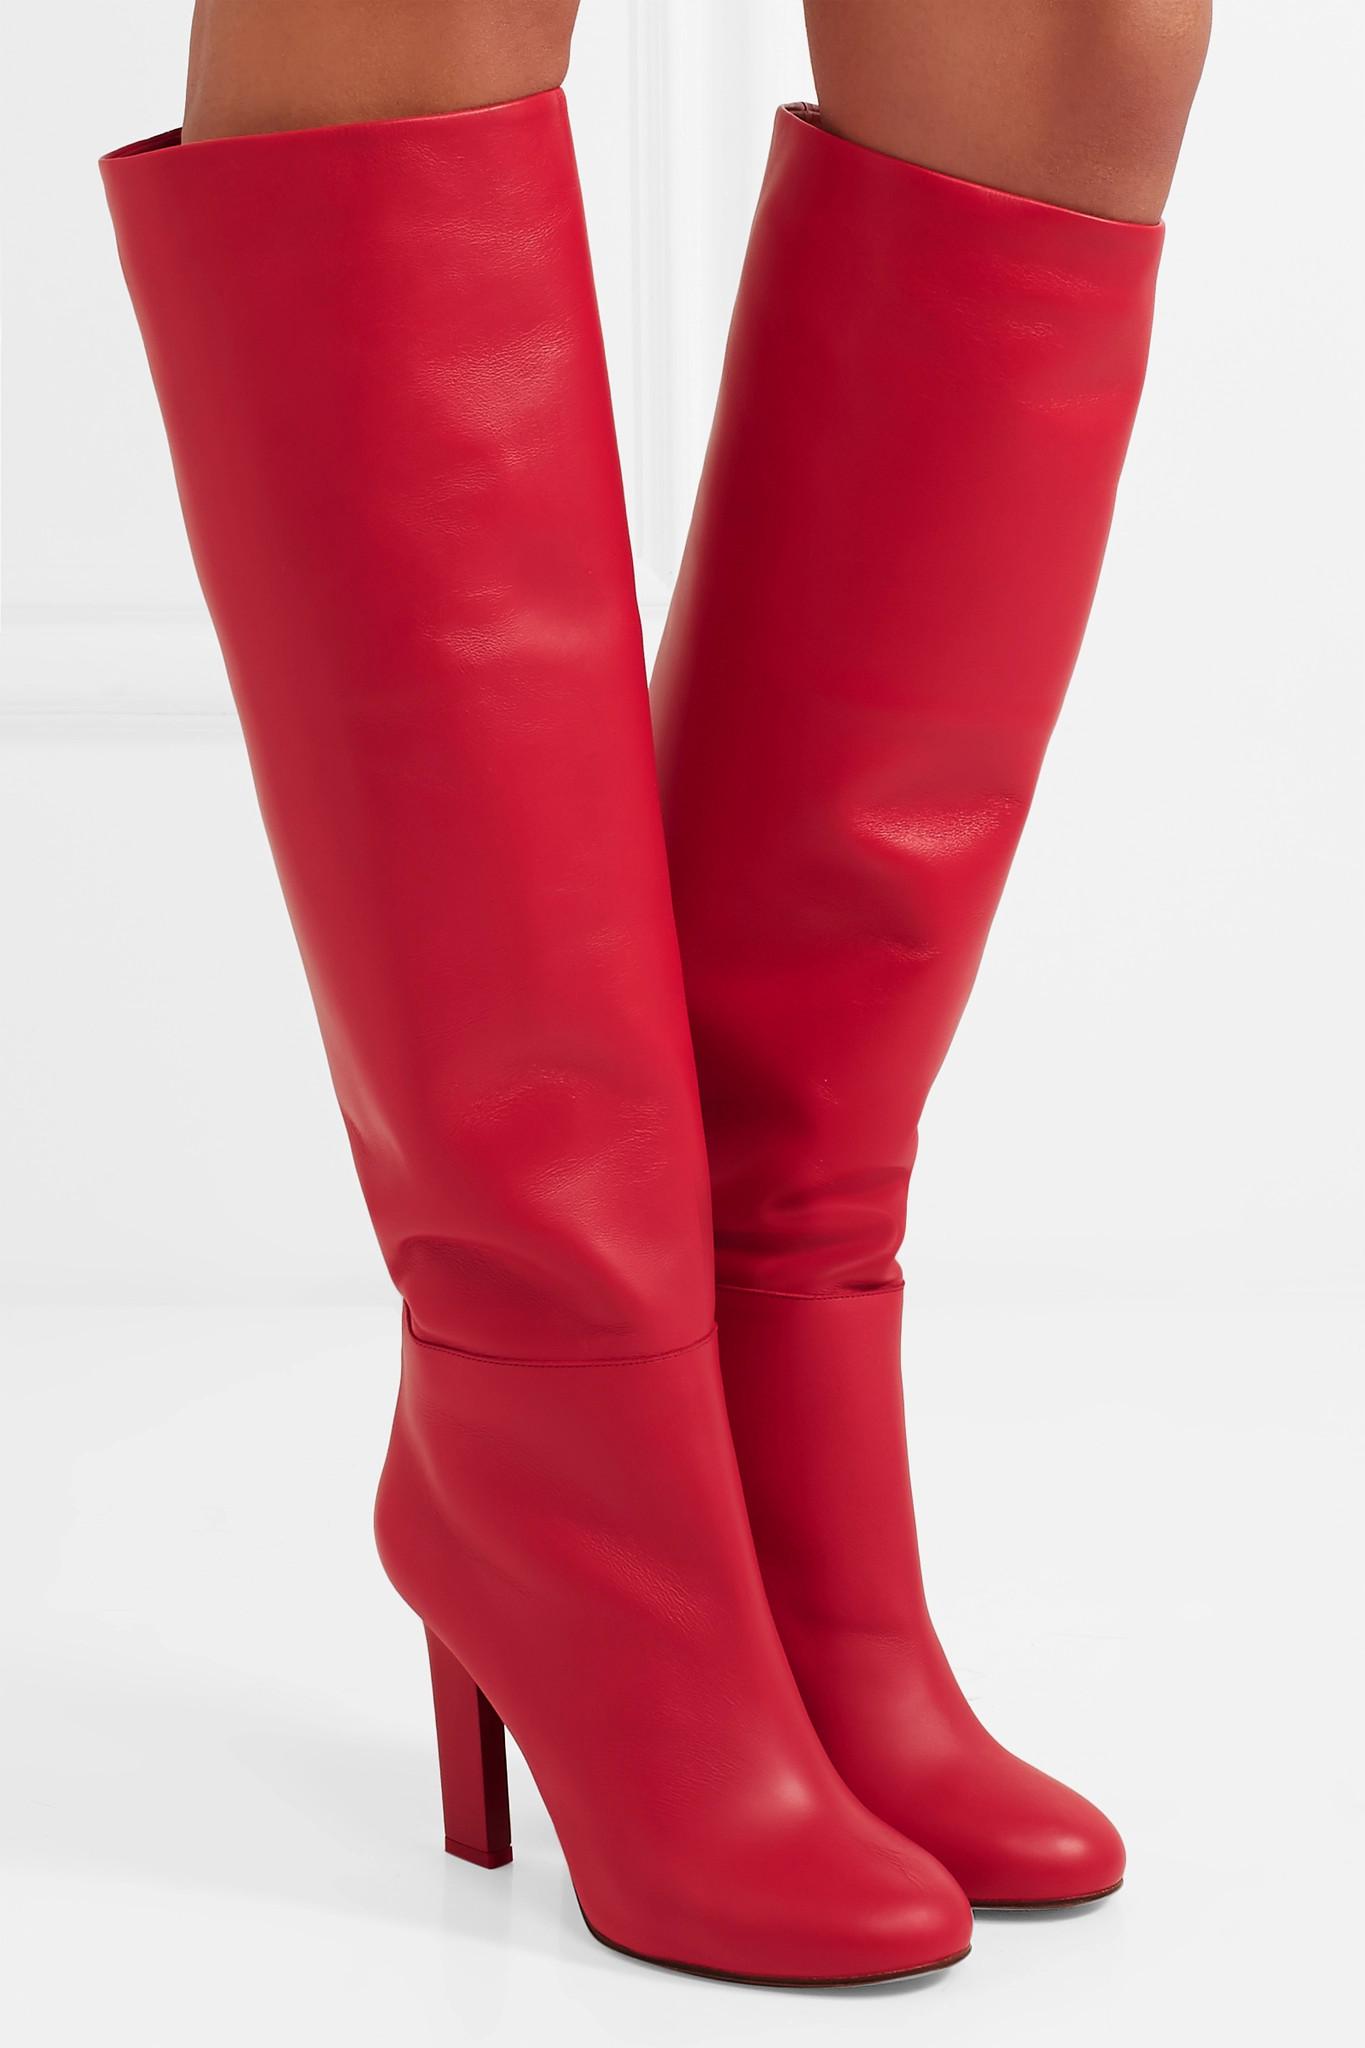 Victoria Beckham Leather Knee Boots in Red - Lyst